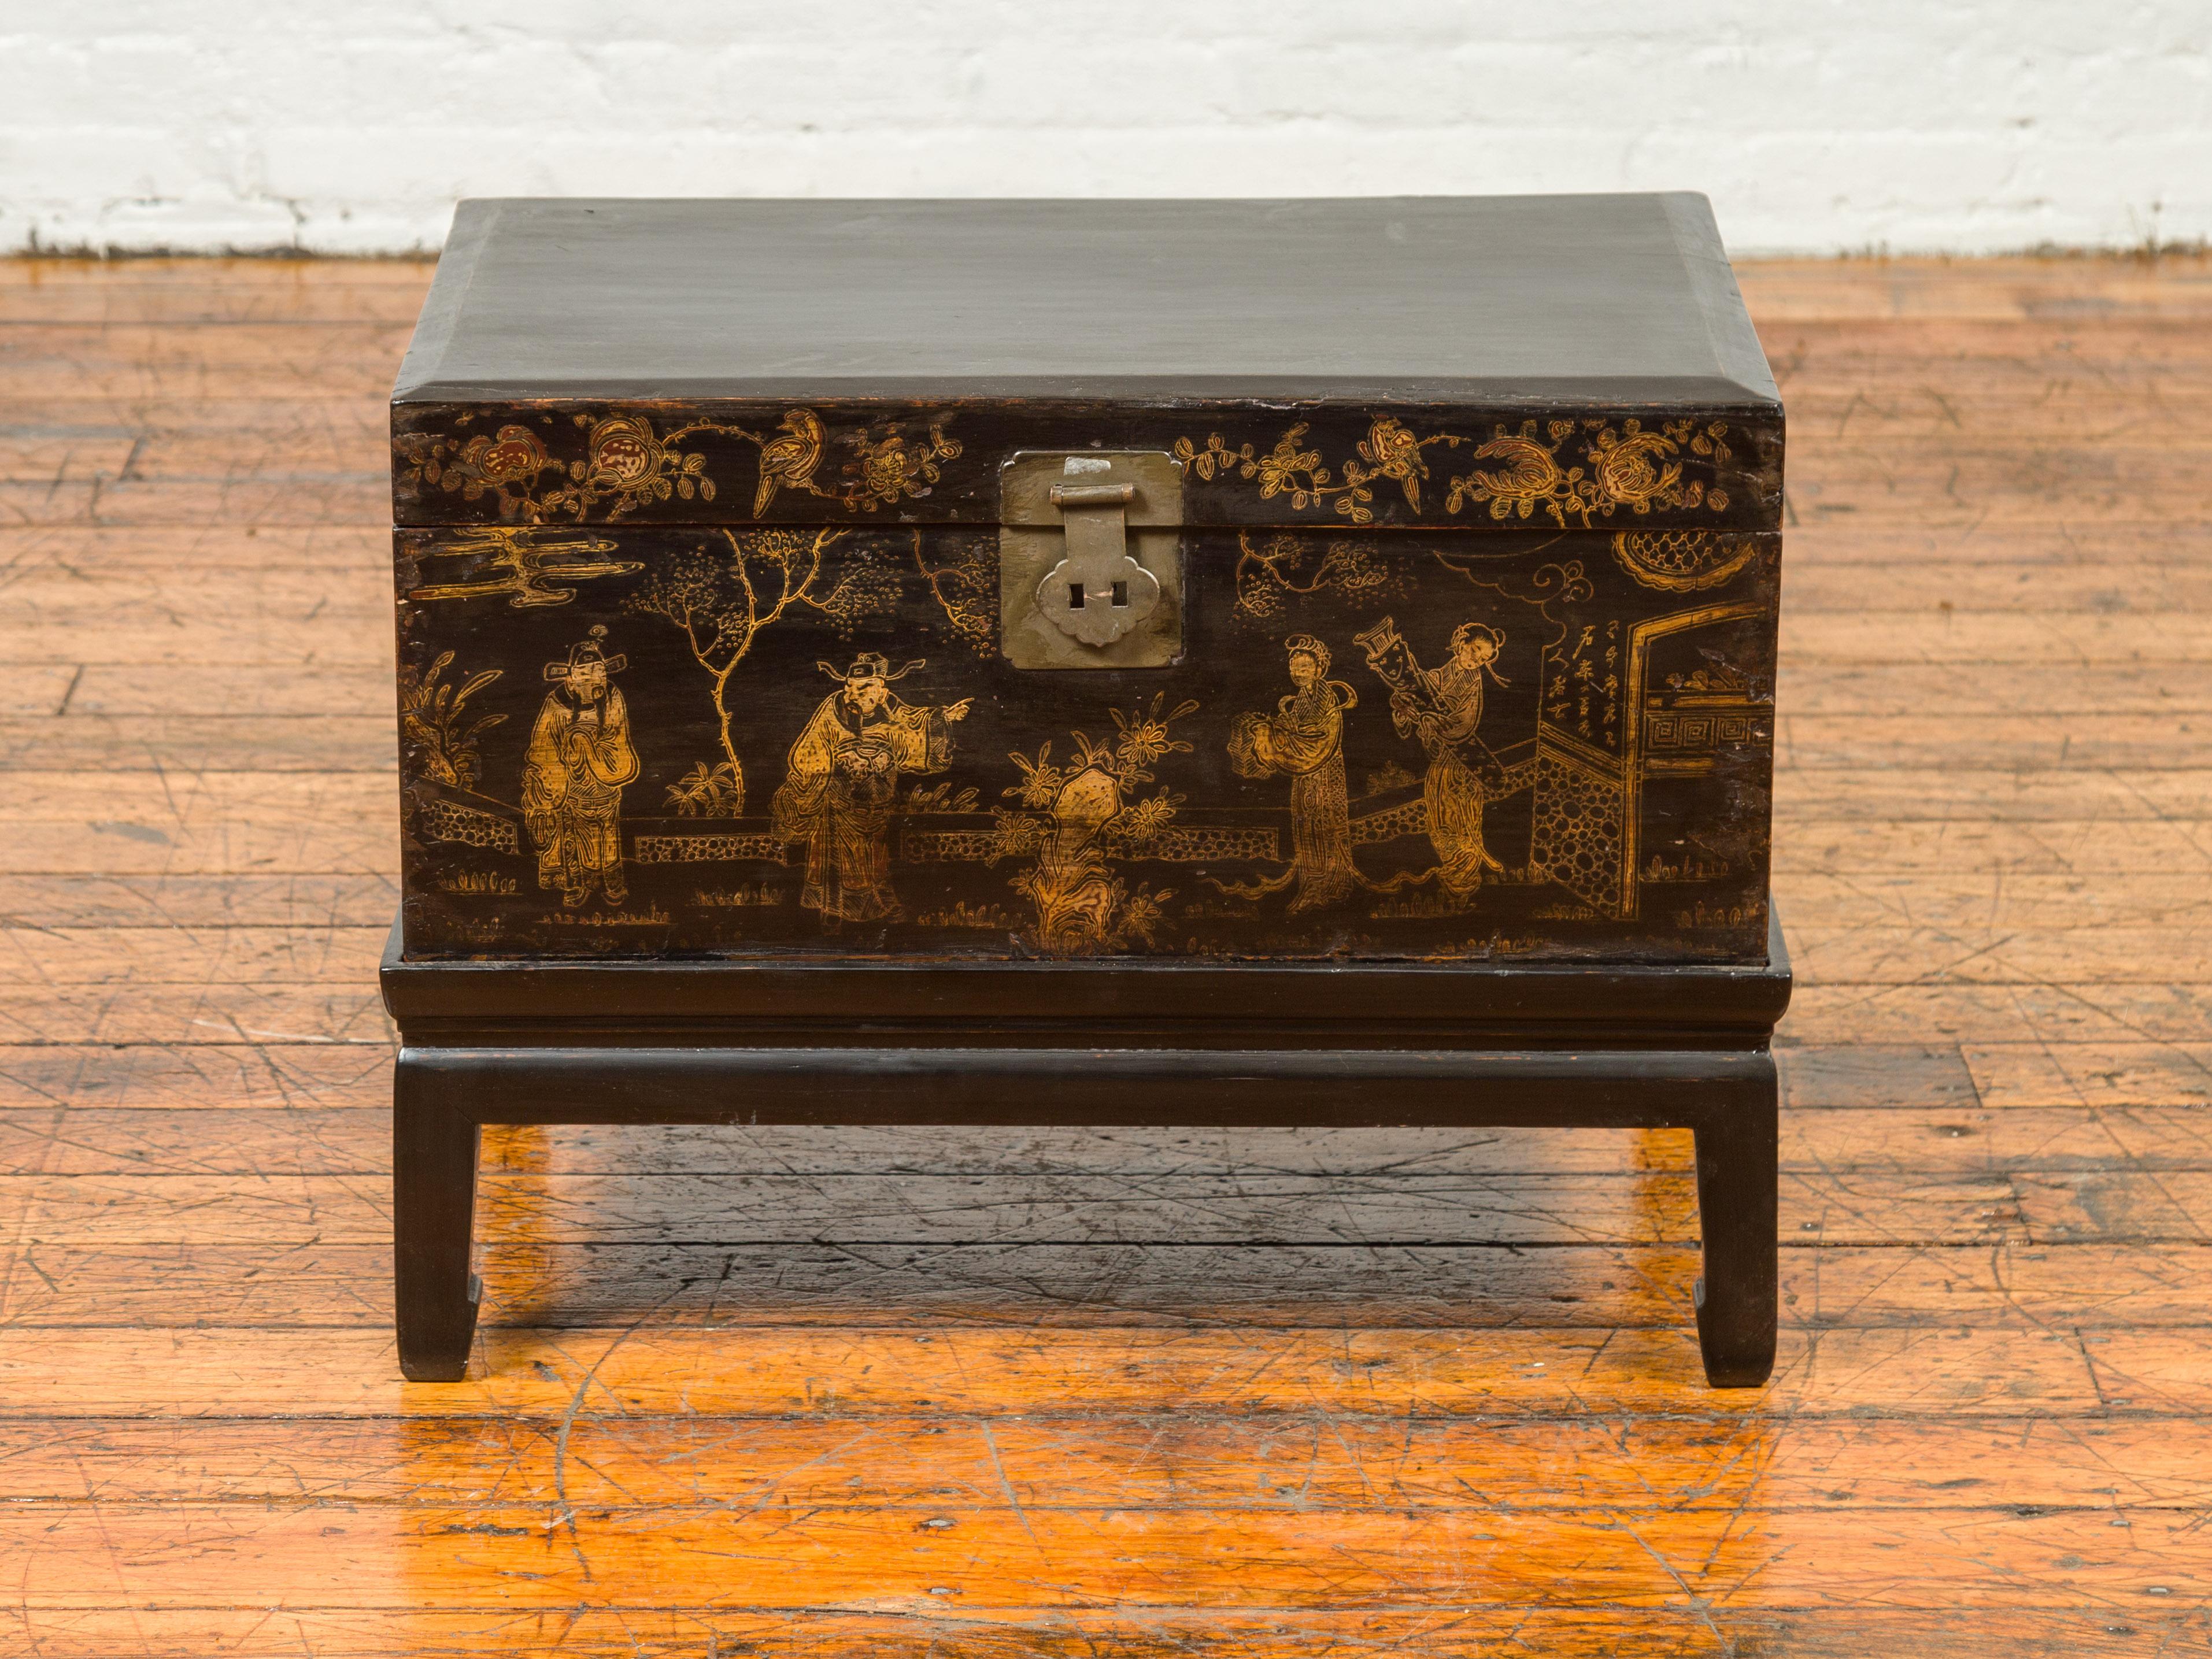 A Chinese Qing Dynasty blanket chest on base from the 19th century, with chinoiserie painting on the front. Crafted in China during the Qing Dynasty, this black and gold chest features a rectangular lid with slightly beveled edges, that opens thanks